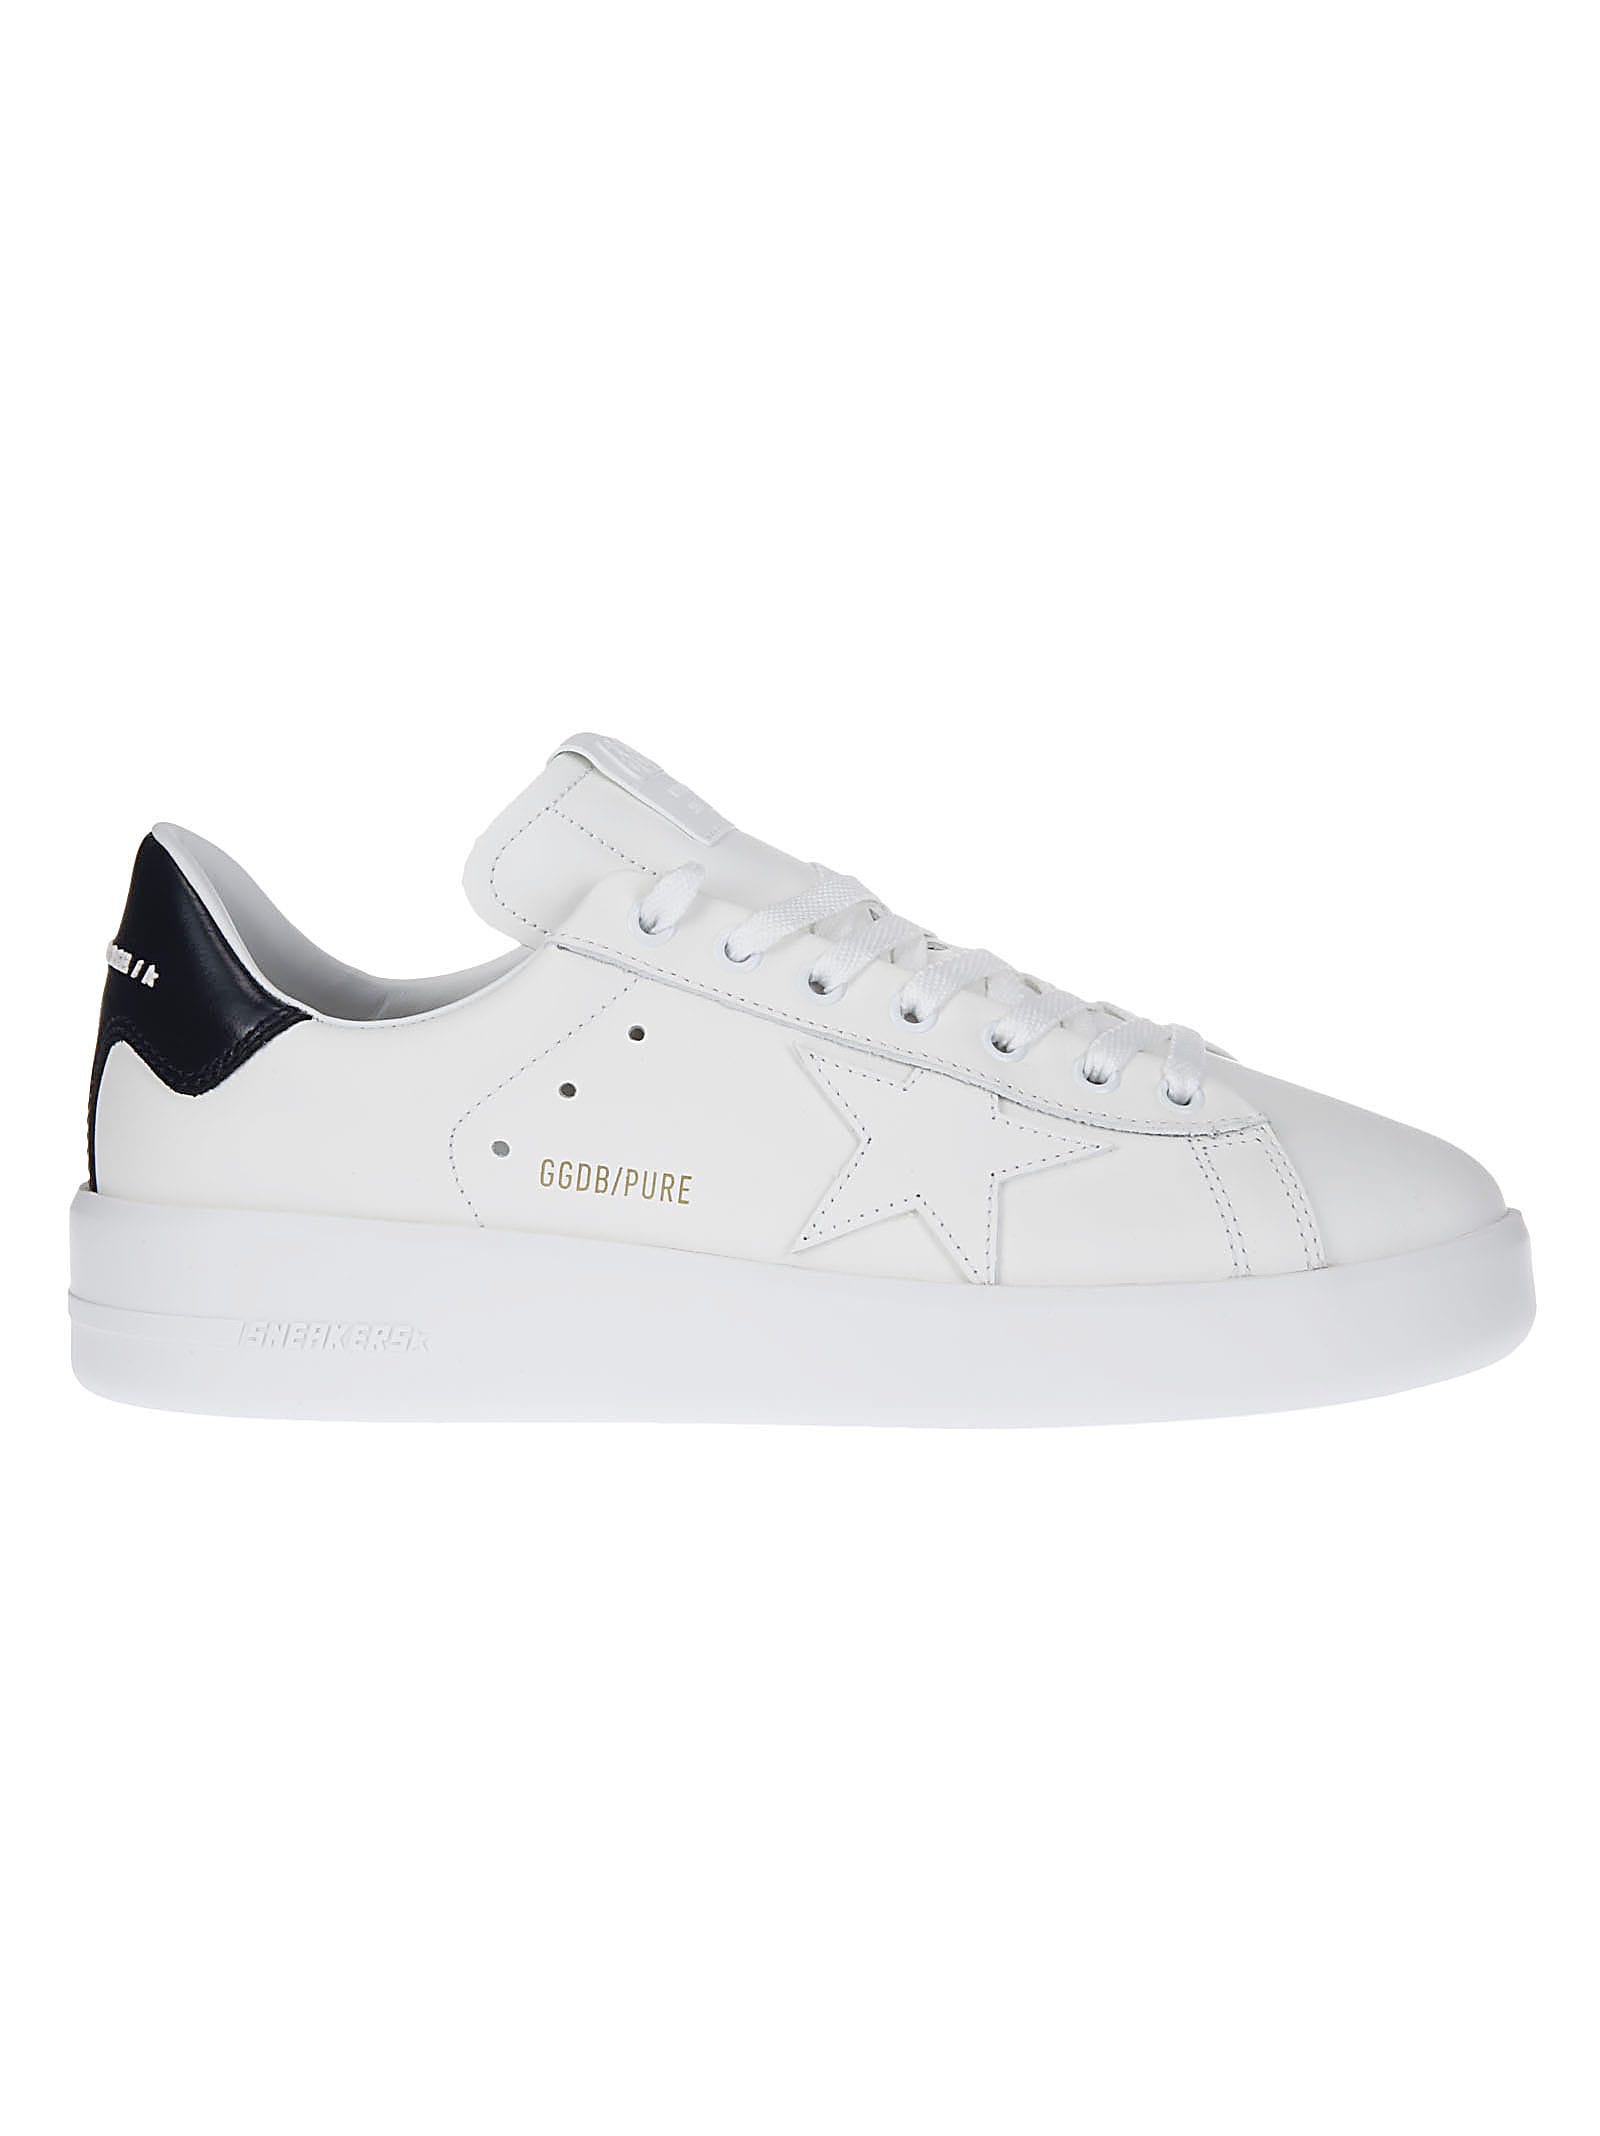 GOLDEN GOOSE PURE STAR LEATHER UPPER